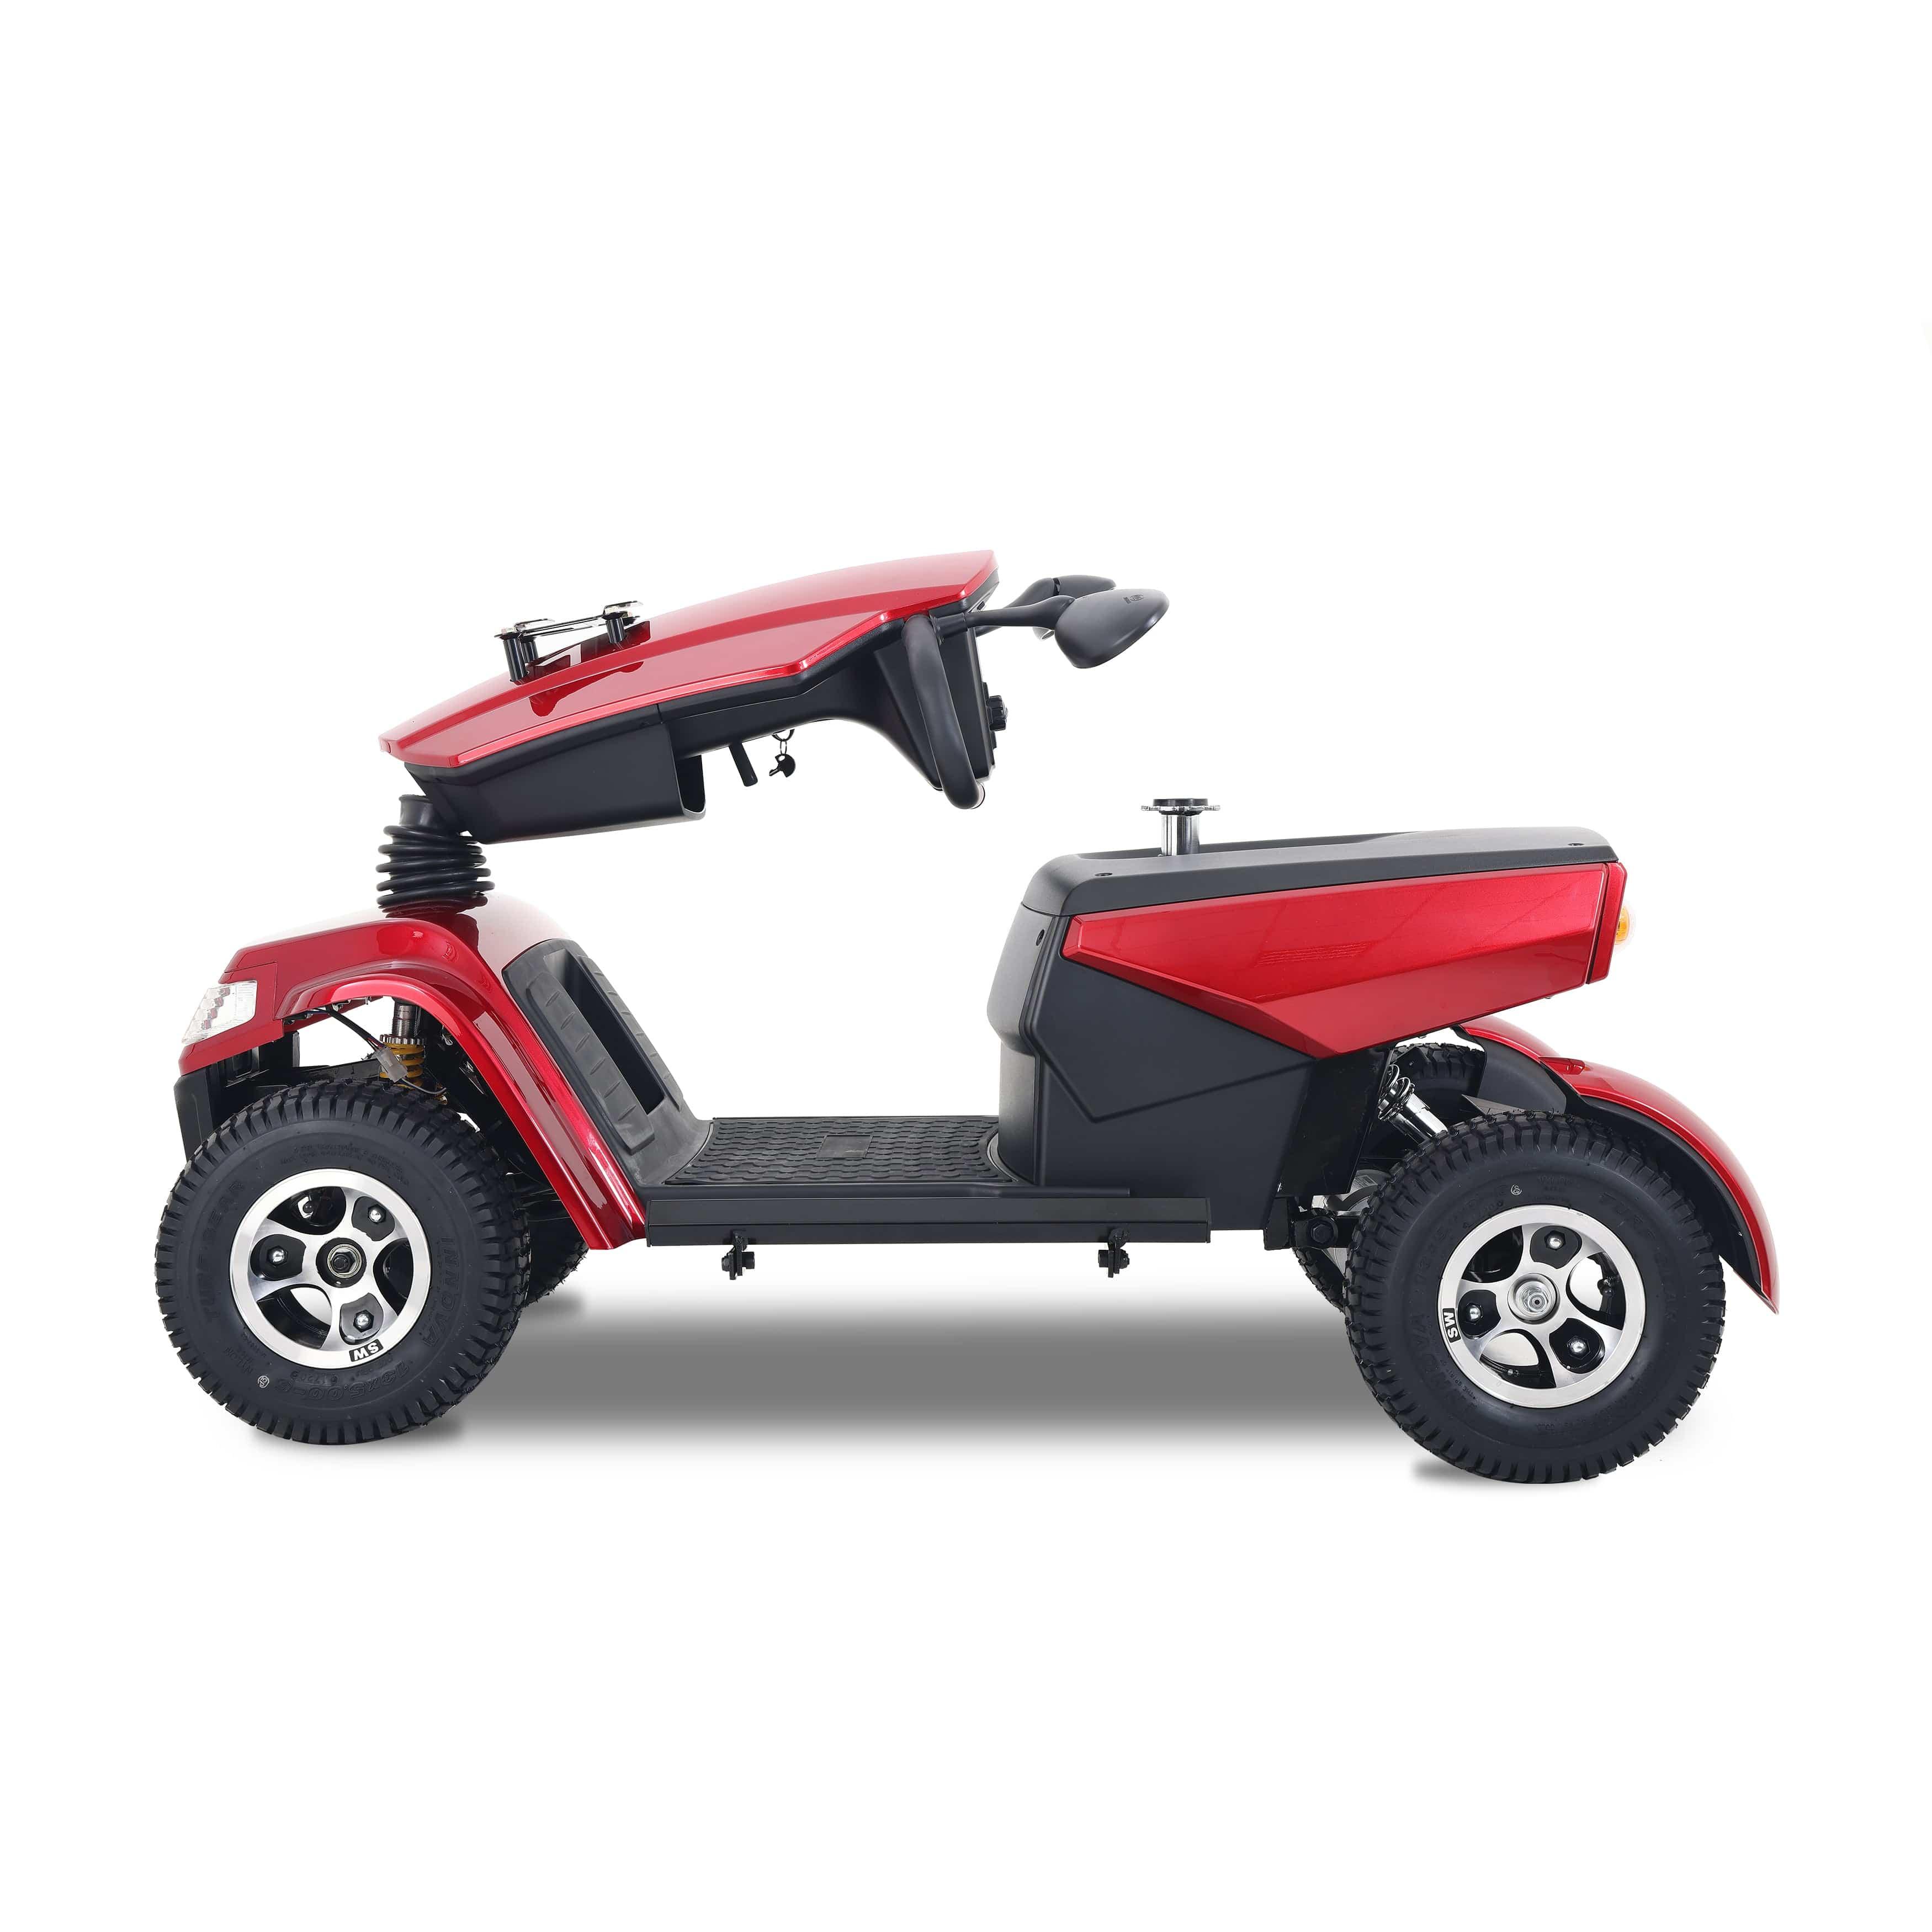 Metro Mobility s800 Heavyweight 4 Wheel Mobility Scooter - Mobility Angel